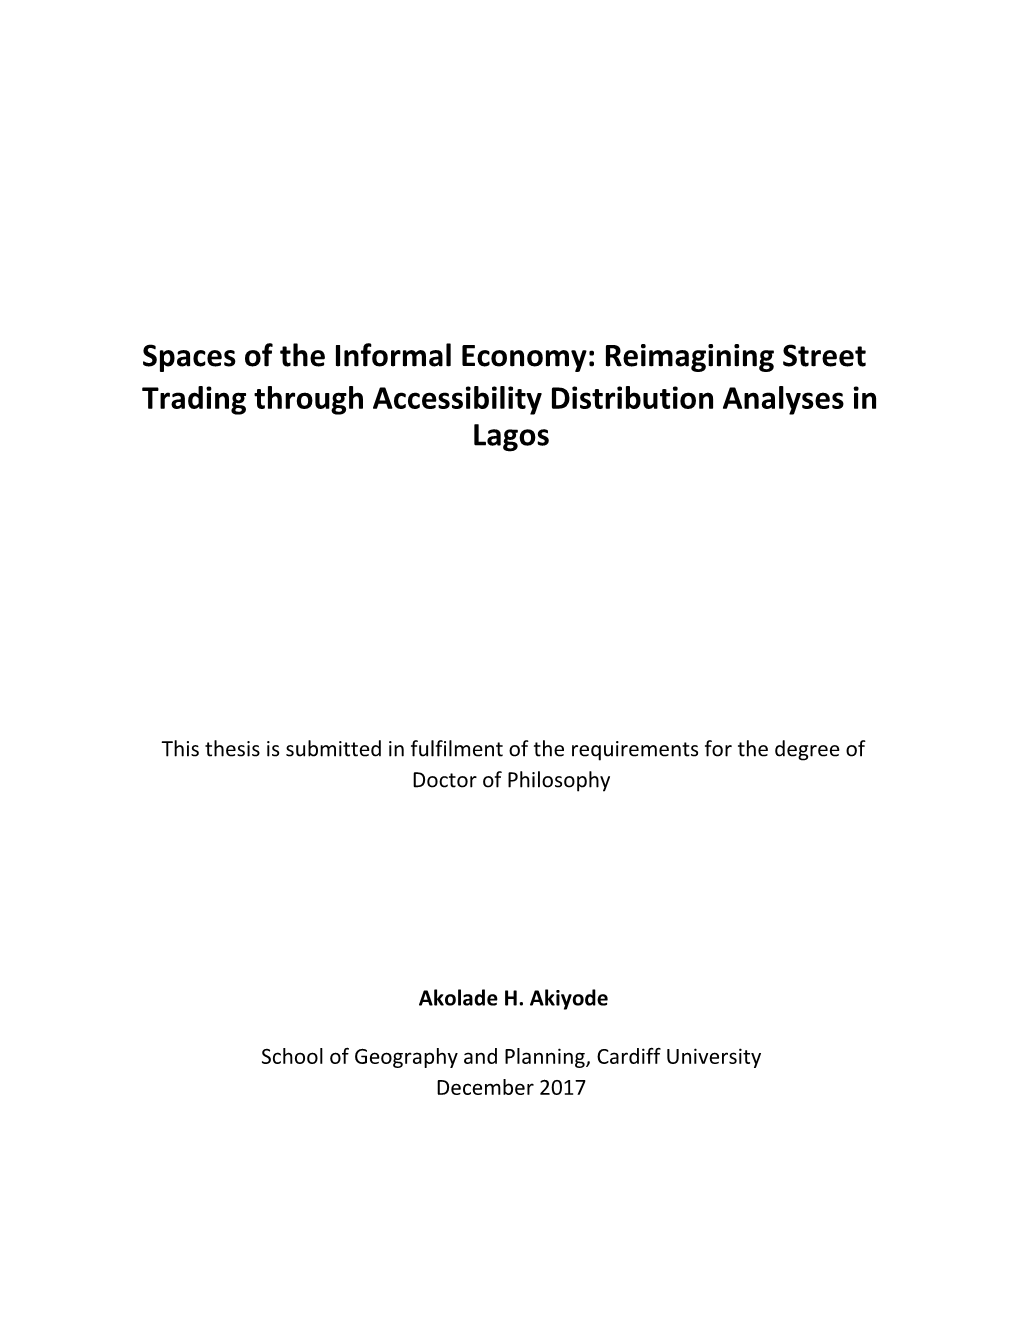 Spaces of the Informal Economy: Reimagining Street Trading Through Accessibility Distribution Analyses in Lagos